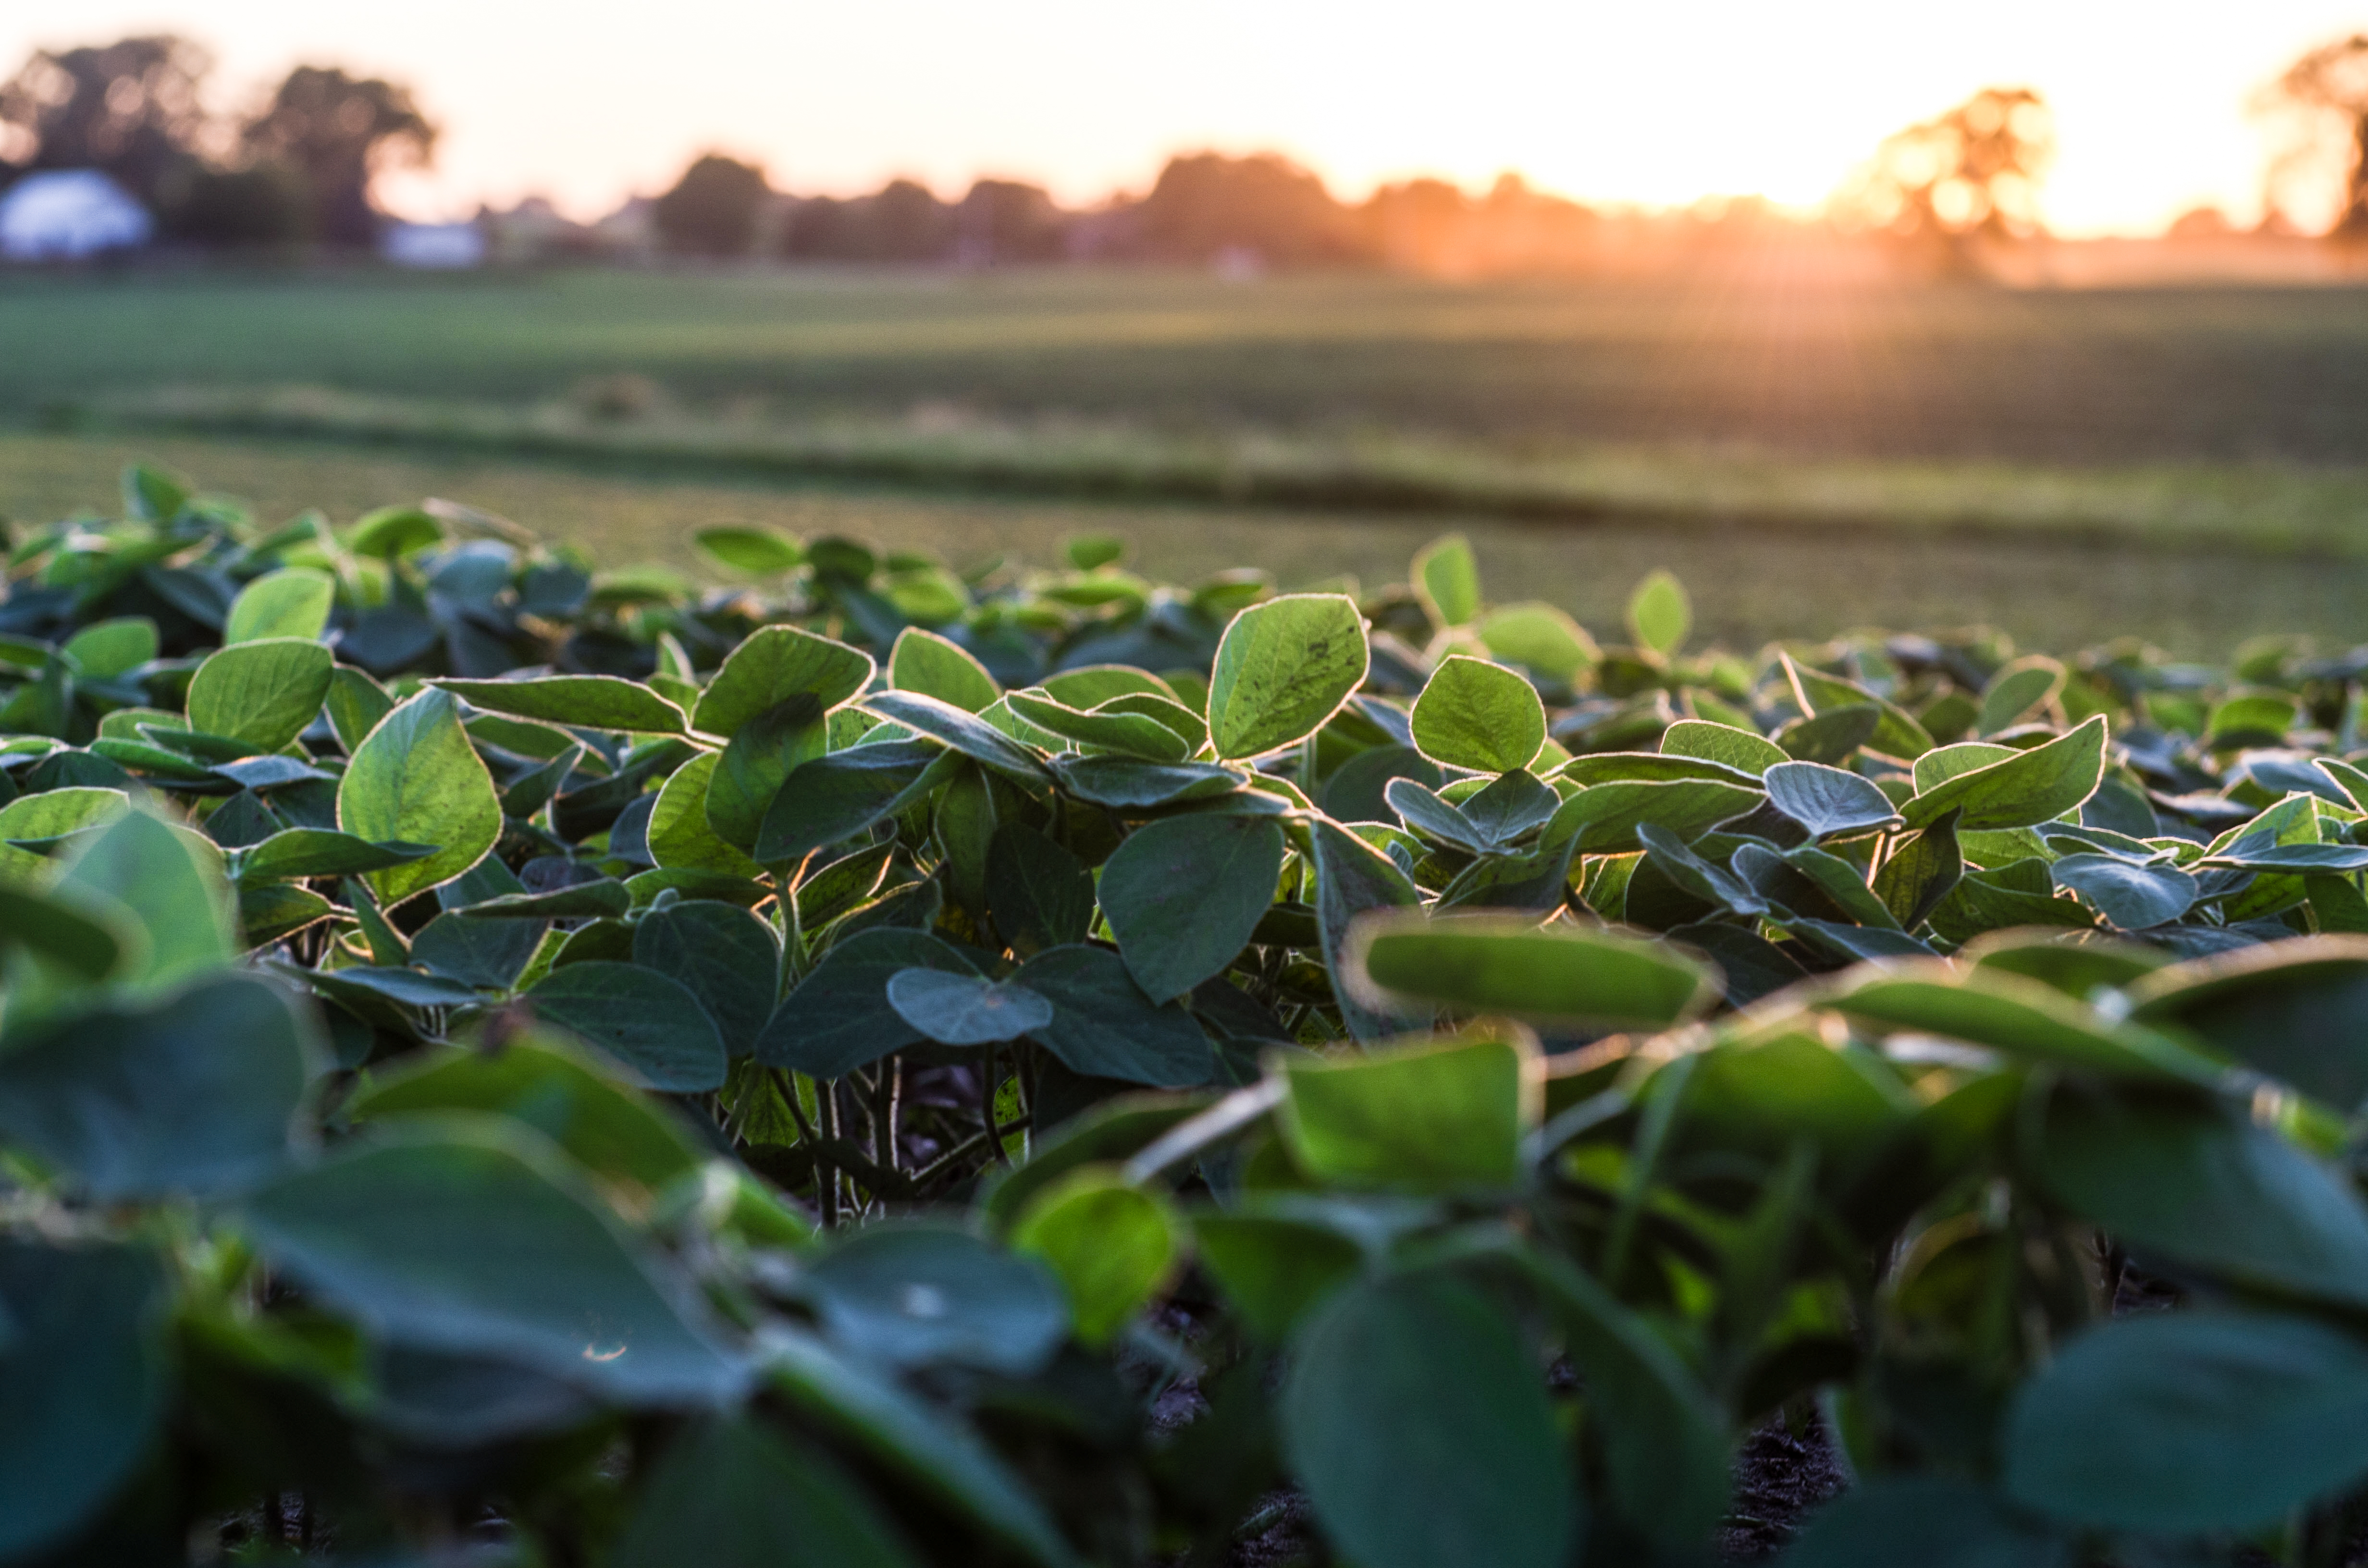 A field of soybeans at sunset